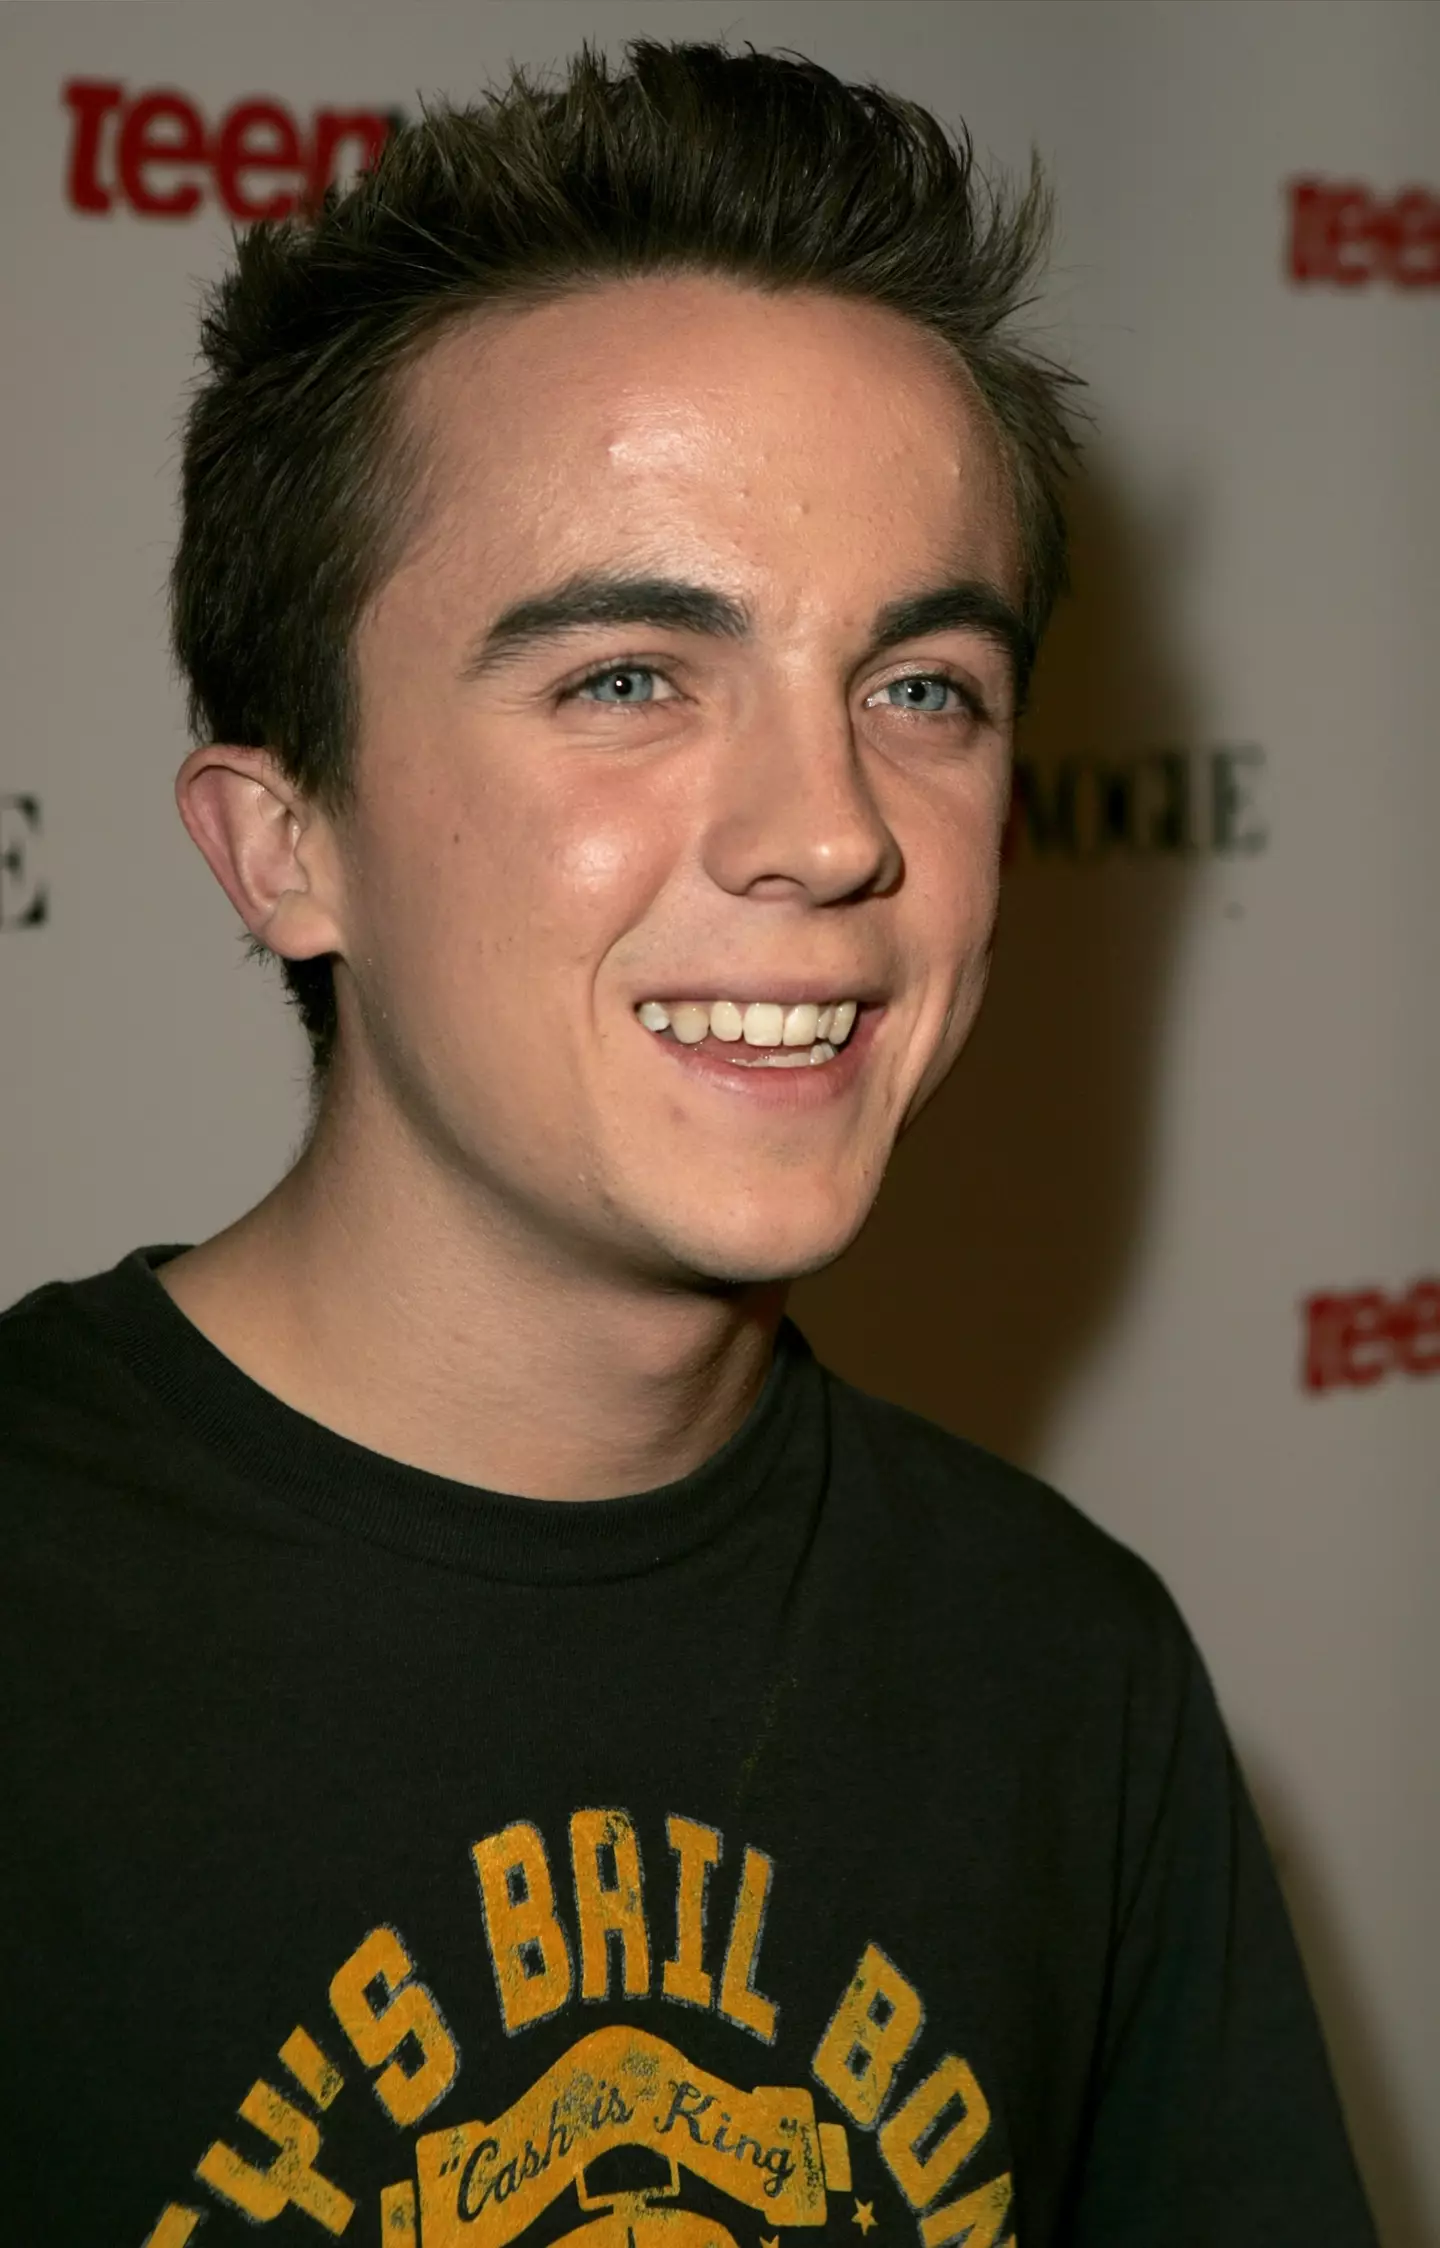 Frankie Muniz opened up about his experiences as a child actor.